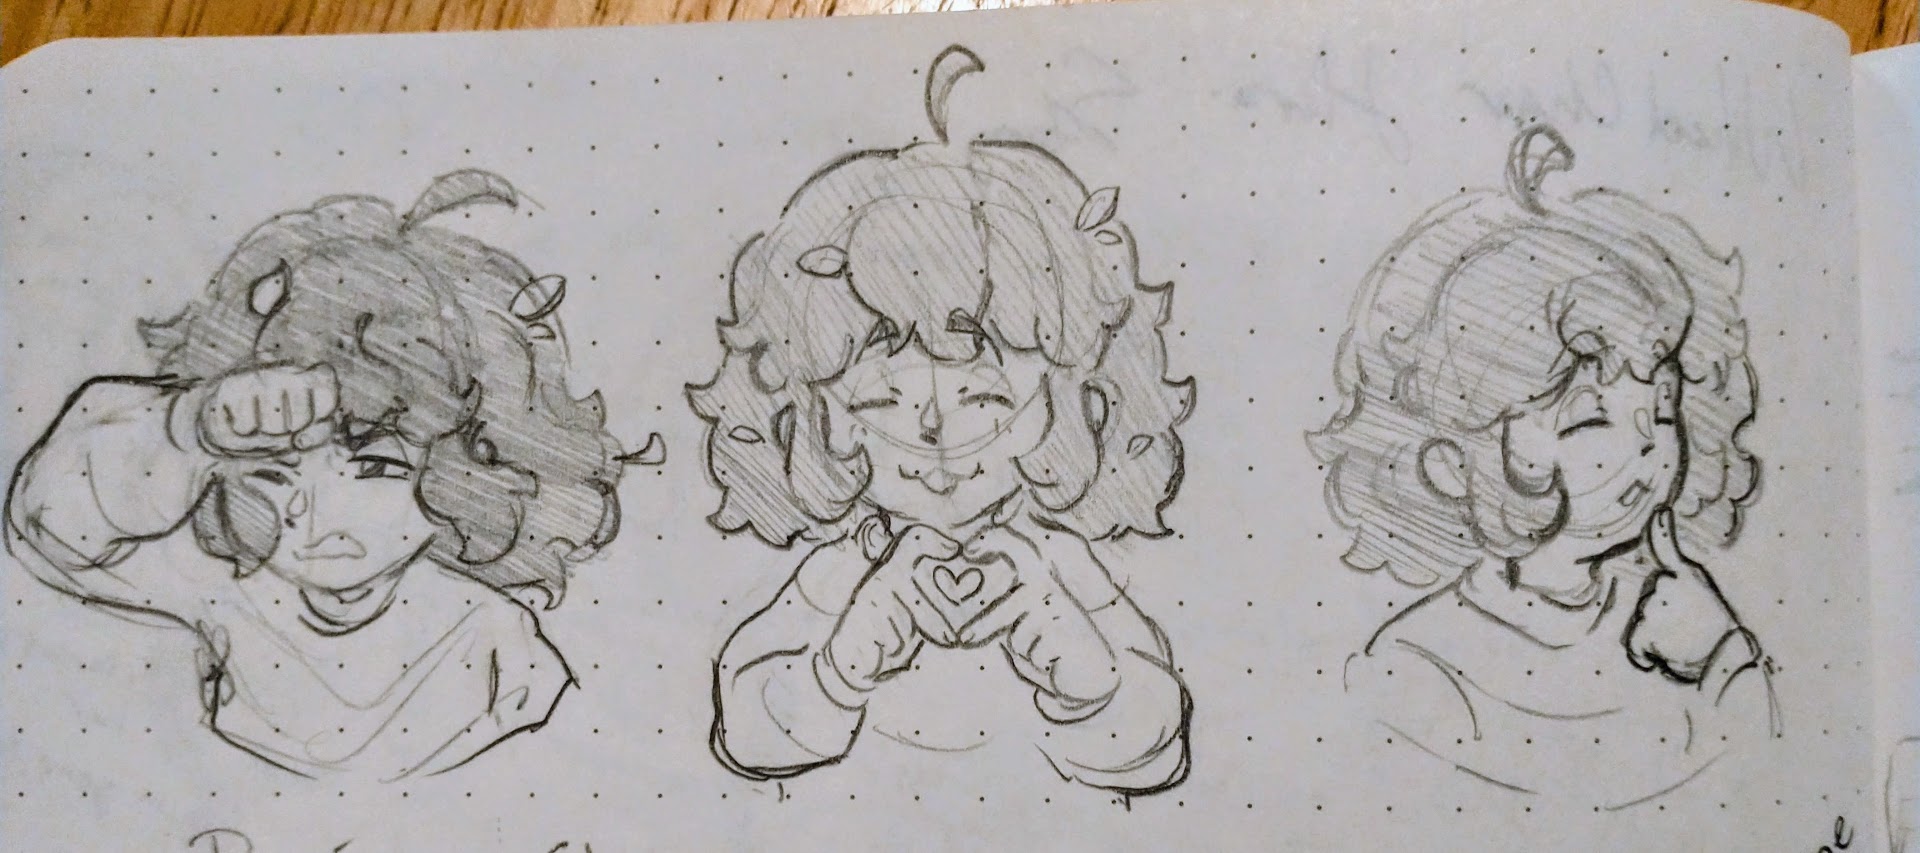 Three Frisk expressions. Left: They are shielding their face from a heavy wind. Middle: They have their hands in a heart shape! Right: They are tapping their chin with an inquisitive expression